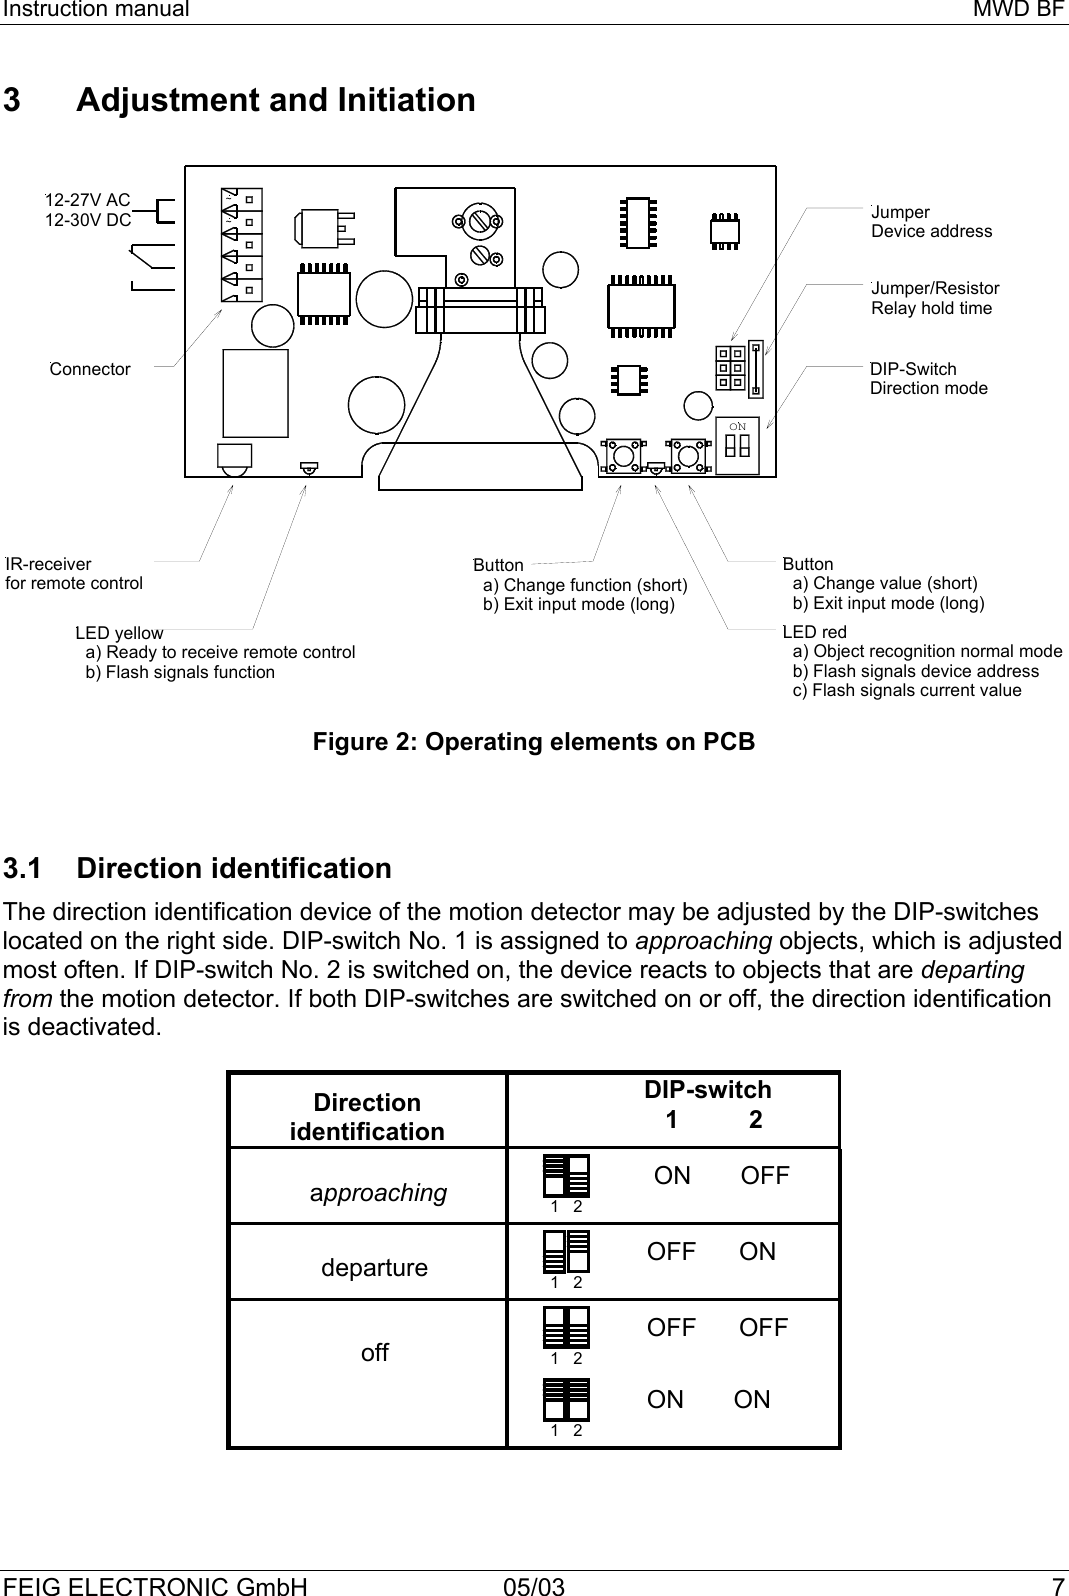 Instruction manual MWD BFFEIG ELECTRONIC GmbH 05/03 73 Adjustment and Initiation3.1 Direction identificationThe direction identification device of the motion detector may be adjusted by the DIP-switcheslocated on the right side. DIP-switch No. 1 is assigned to approaching objects, which is adjustedmost often. If DIP-switch No. 2 is switched on, the device reacts to objects that are departingfrom the motion detector. If both DIP-switches are switched on or off, the direction identificationis deactivated.Directionidentification        DIP-switch               1          2 approaching 1   2   ON       OFFdeparture 1   2  OFF      ONoff 1   2  OFF      OFF1   2  ON       ONButton  a) Change function (short)  b) Exit input mode (long)LED yellow  a) Ready to receive remote control  b) Flash signals functionIR-receiverfor remote controlConnector12-27V AC12-30V DC~~DIP-SwitchDirection modeONButton  a) Change value (short)  b) Exit input mode (long)LED red  a) Object recognition normal mode  b) Flash signals device address  c) Flash signals current valueJumperDevice addressJumper/ResistorRelay hold time Figure 2: Operating elements on PCB